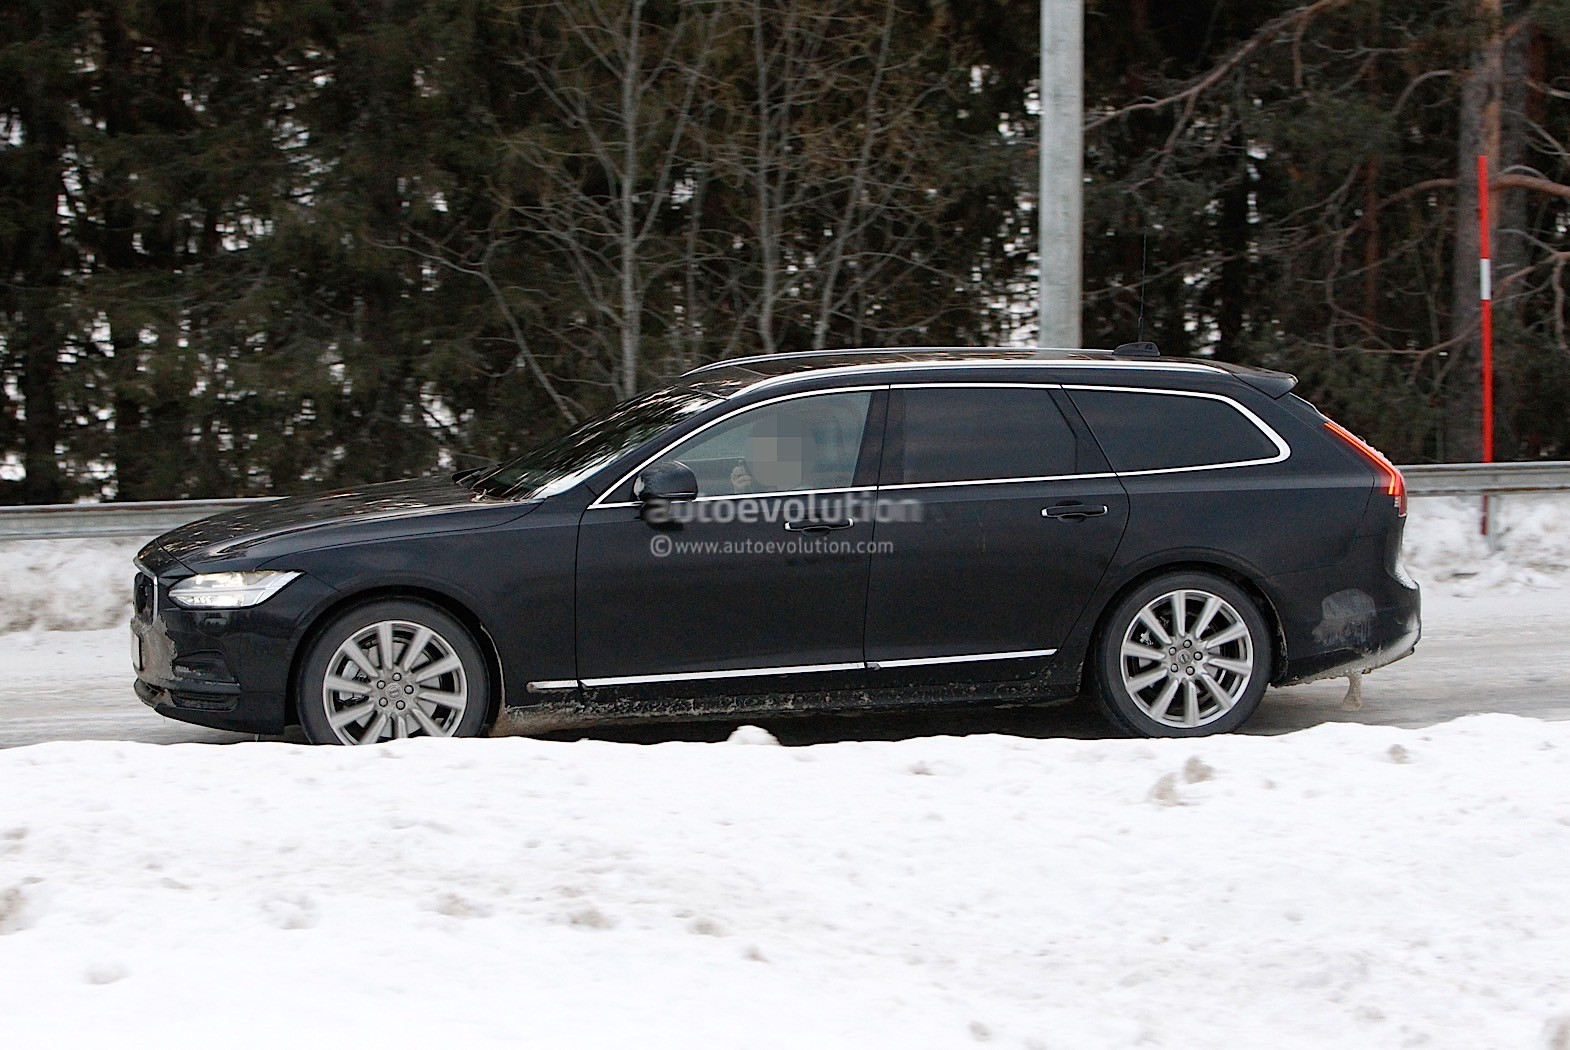 https://s1.cdn.autoevolution.com/images/news/gallery/2021-volvo-s90-and-v90-facelift-wear-useless-camouflage-winter-testing_8.jpg